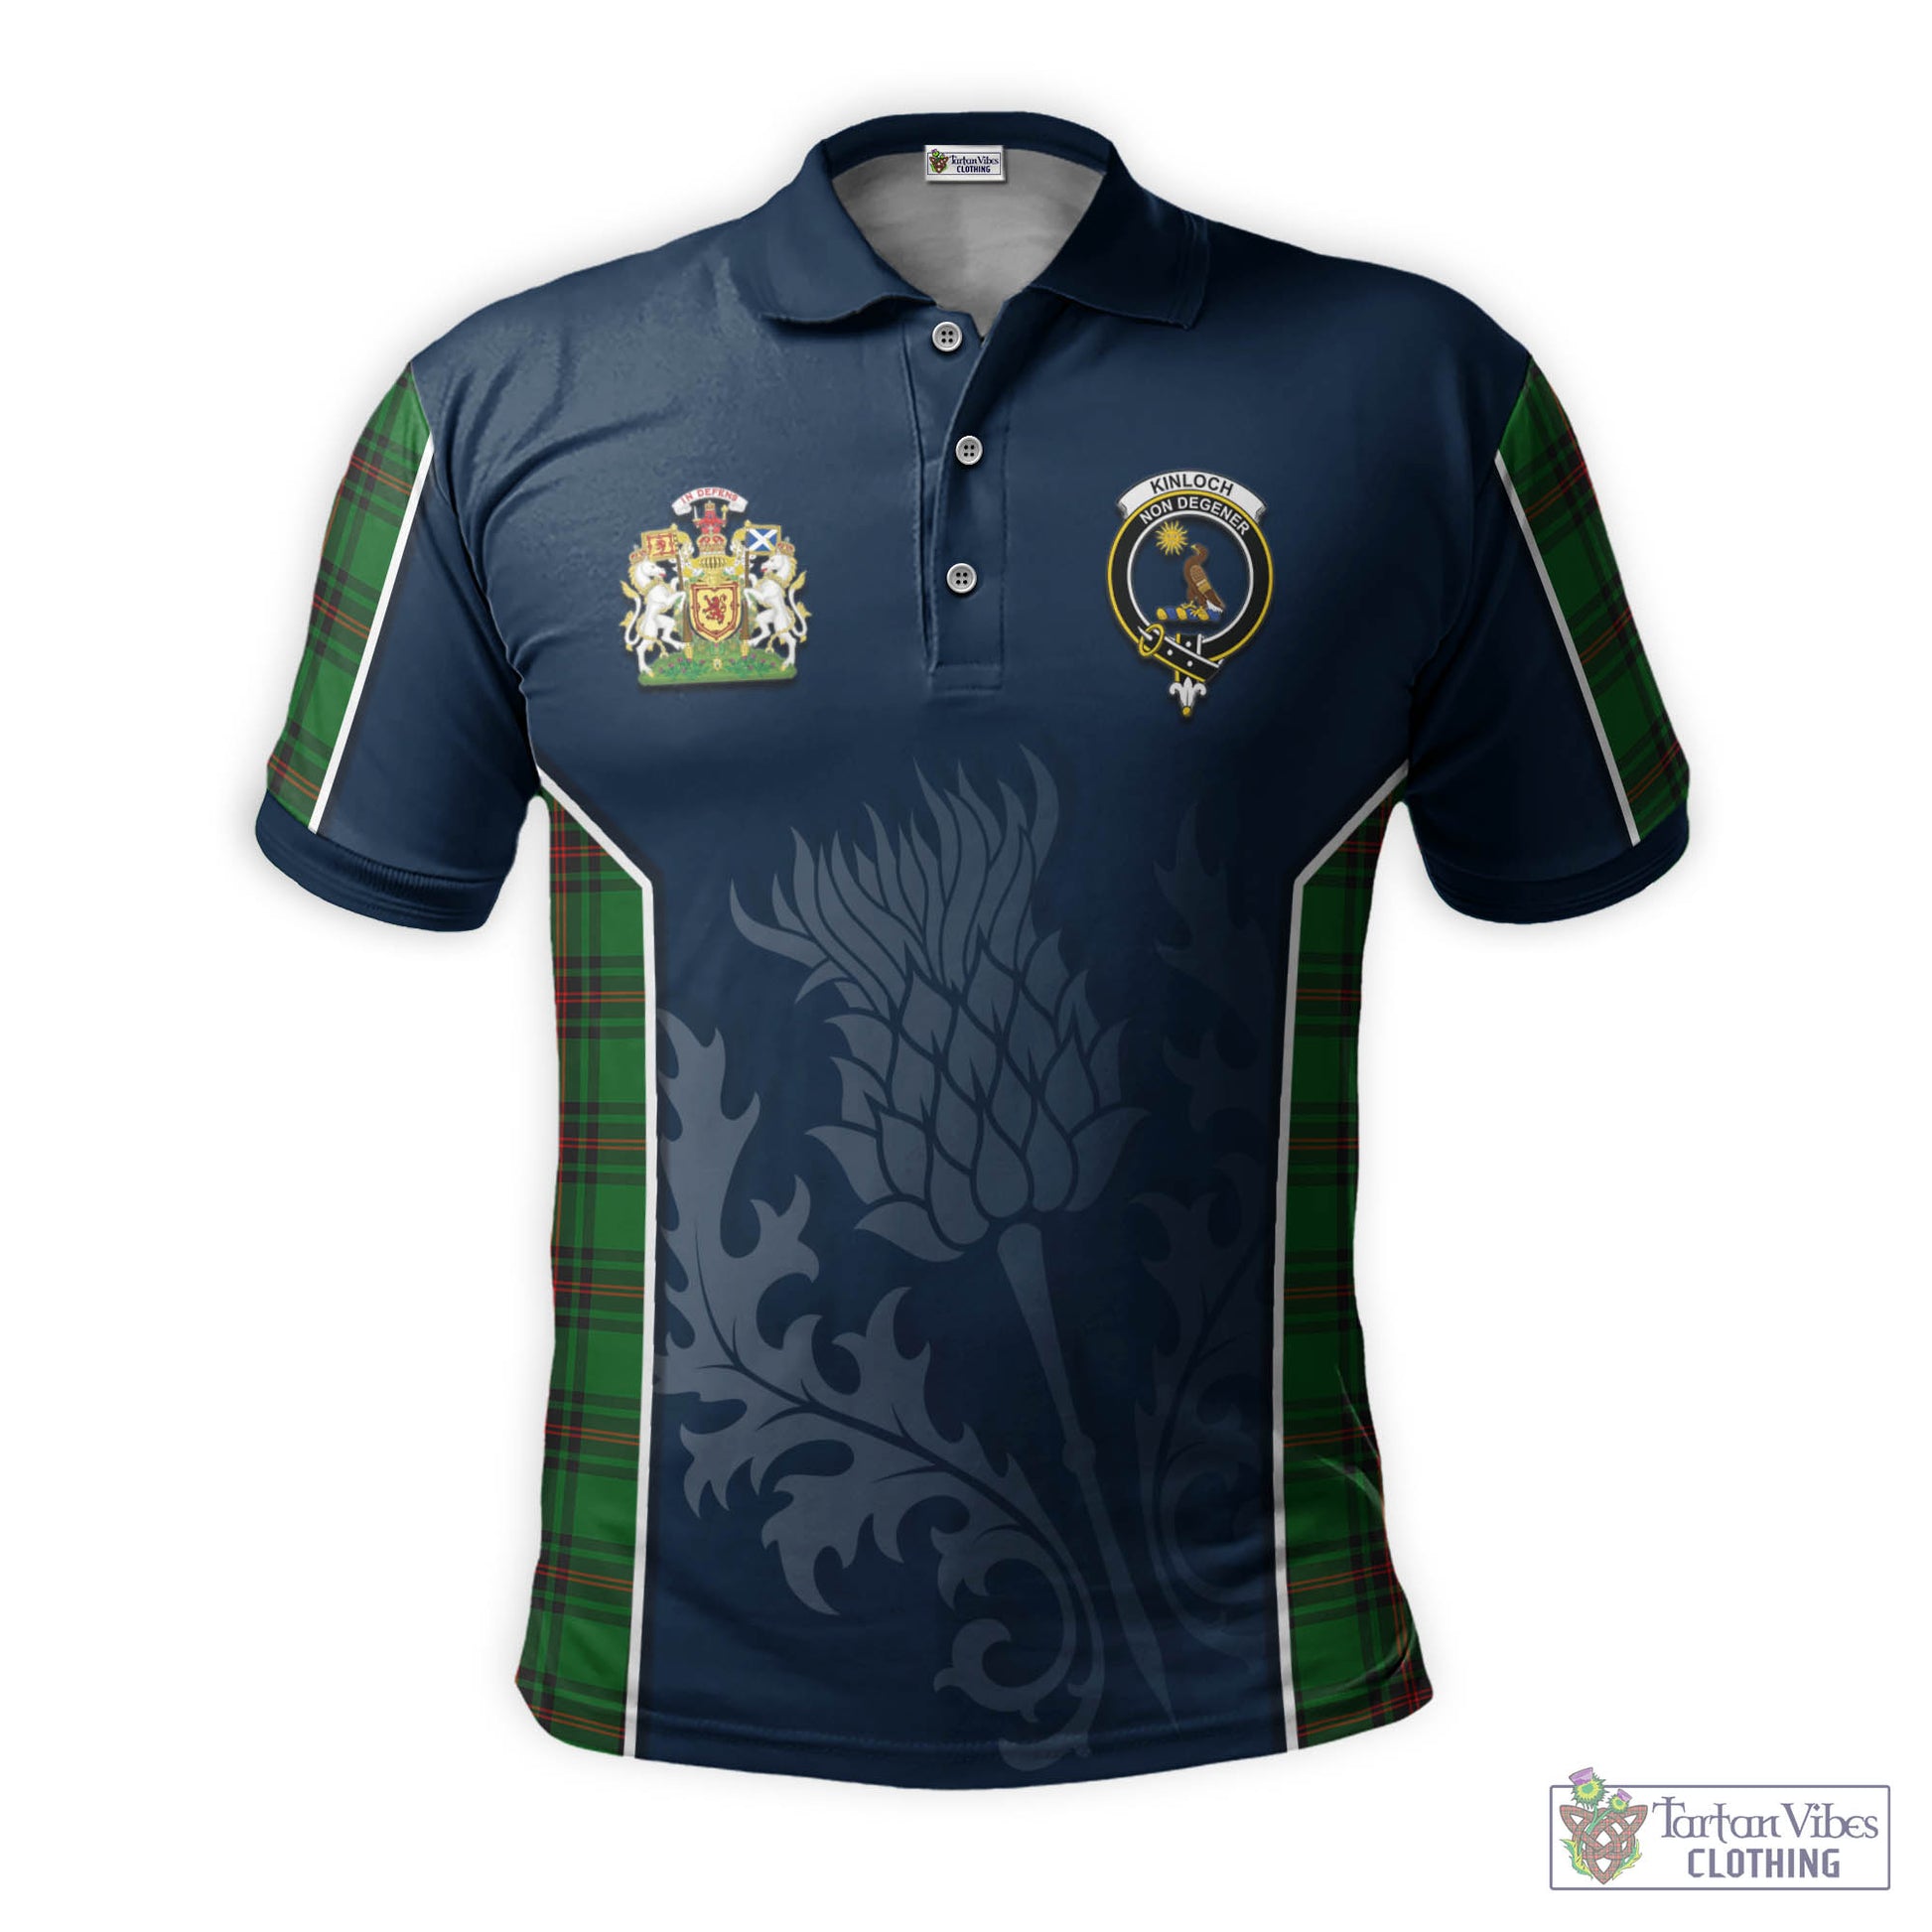 Tartan Vibes Clothing Kinloch Tartan Men's Polo Shirt with Family Crest and Scottish Thistle Vibes Sport Style